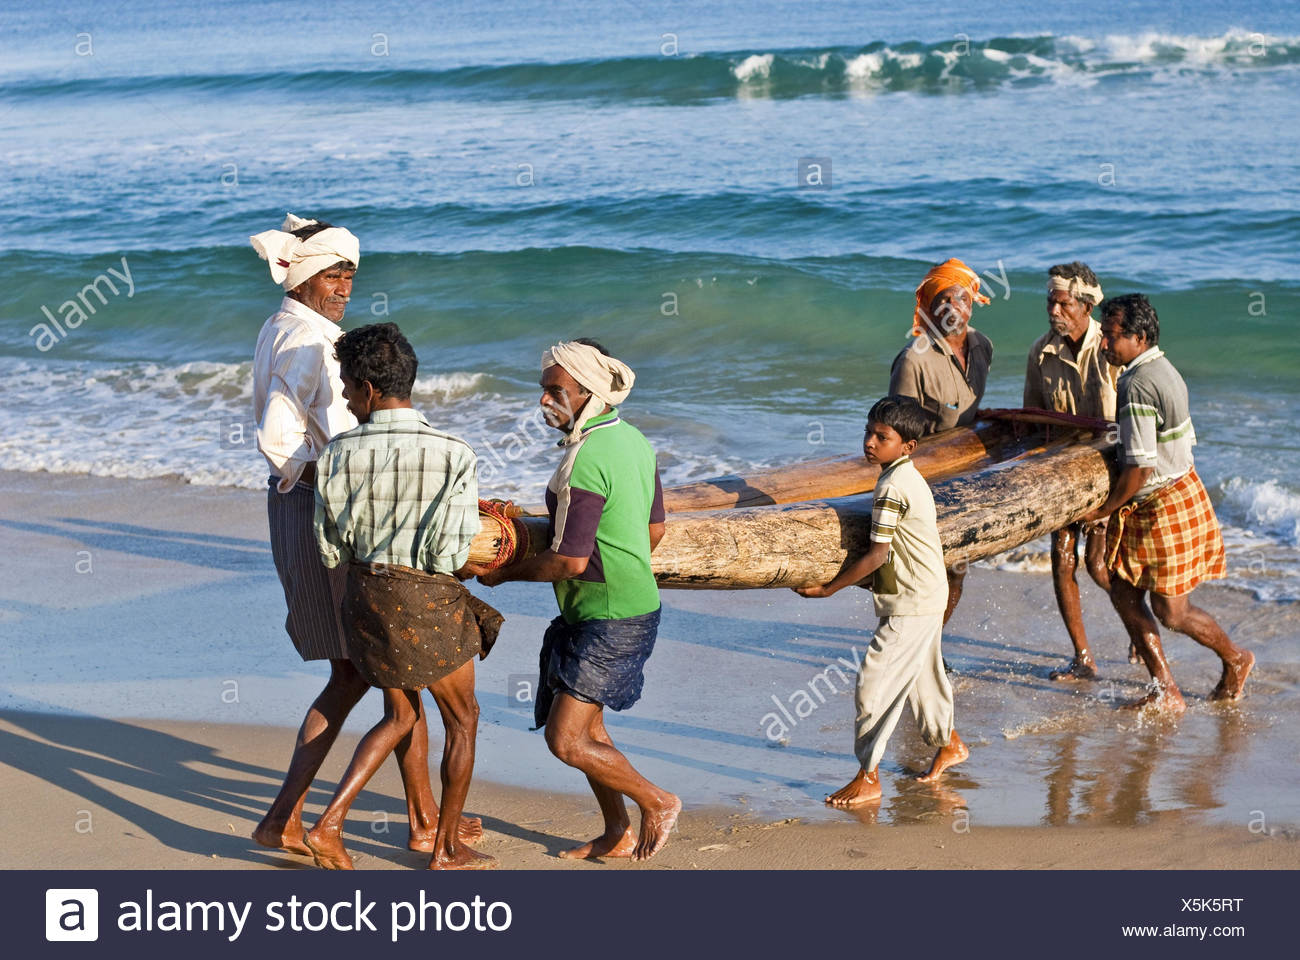 fishermen-carry-boat-from-the-water-X5K5RT.jpg